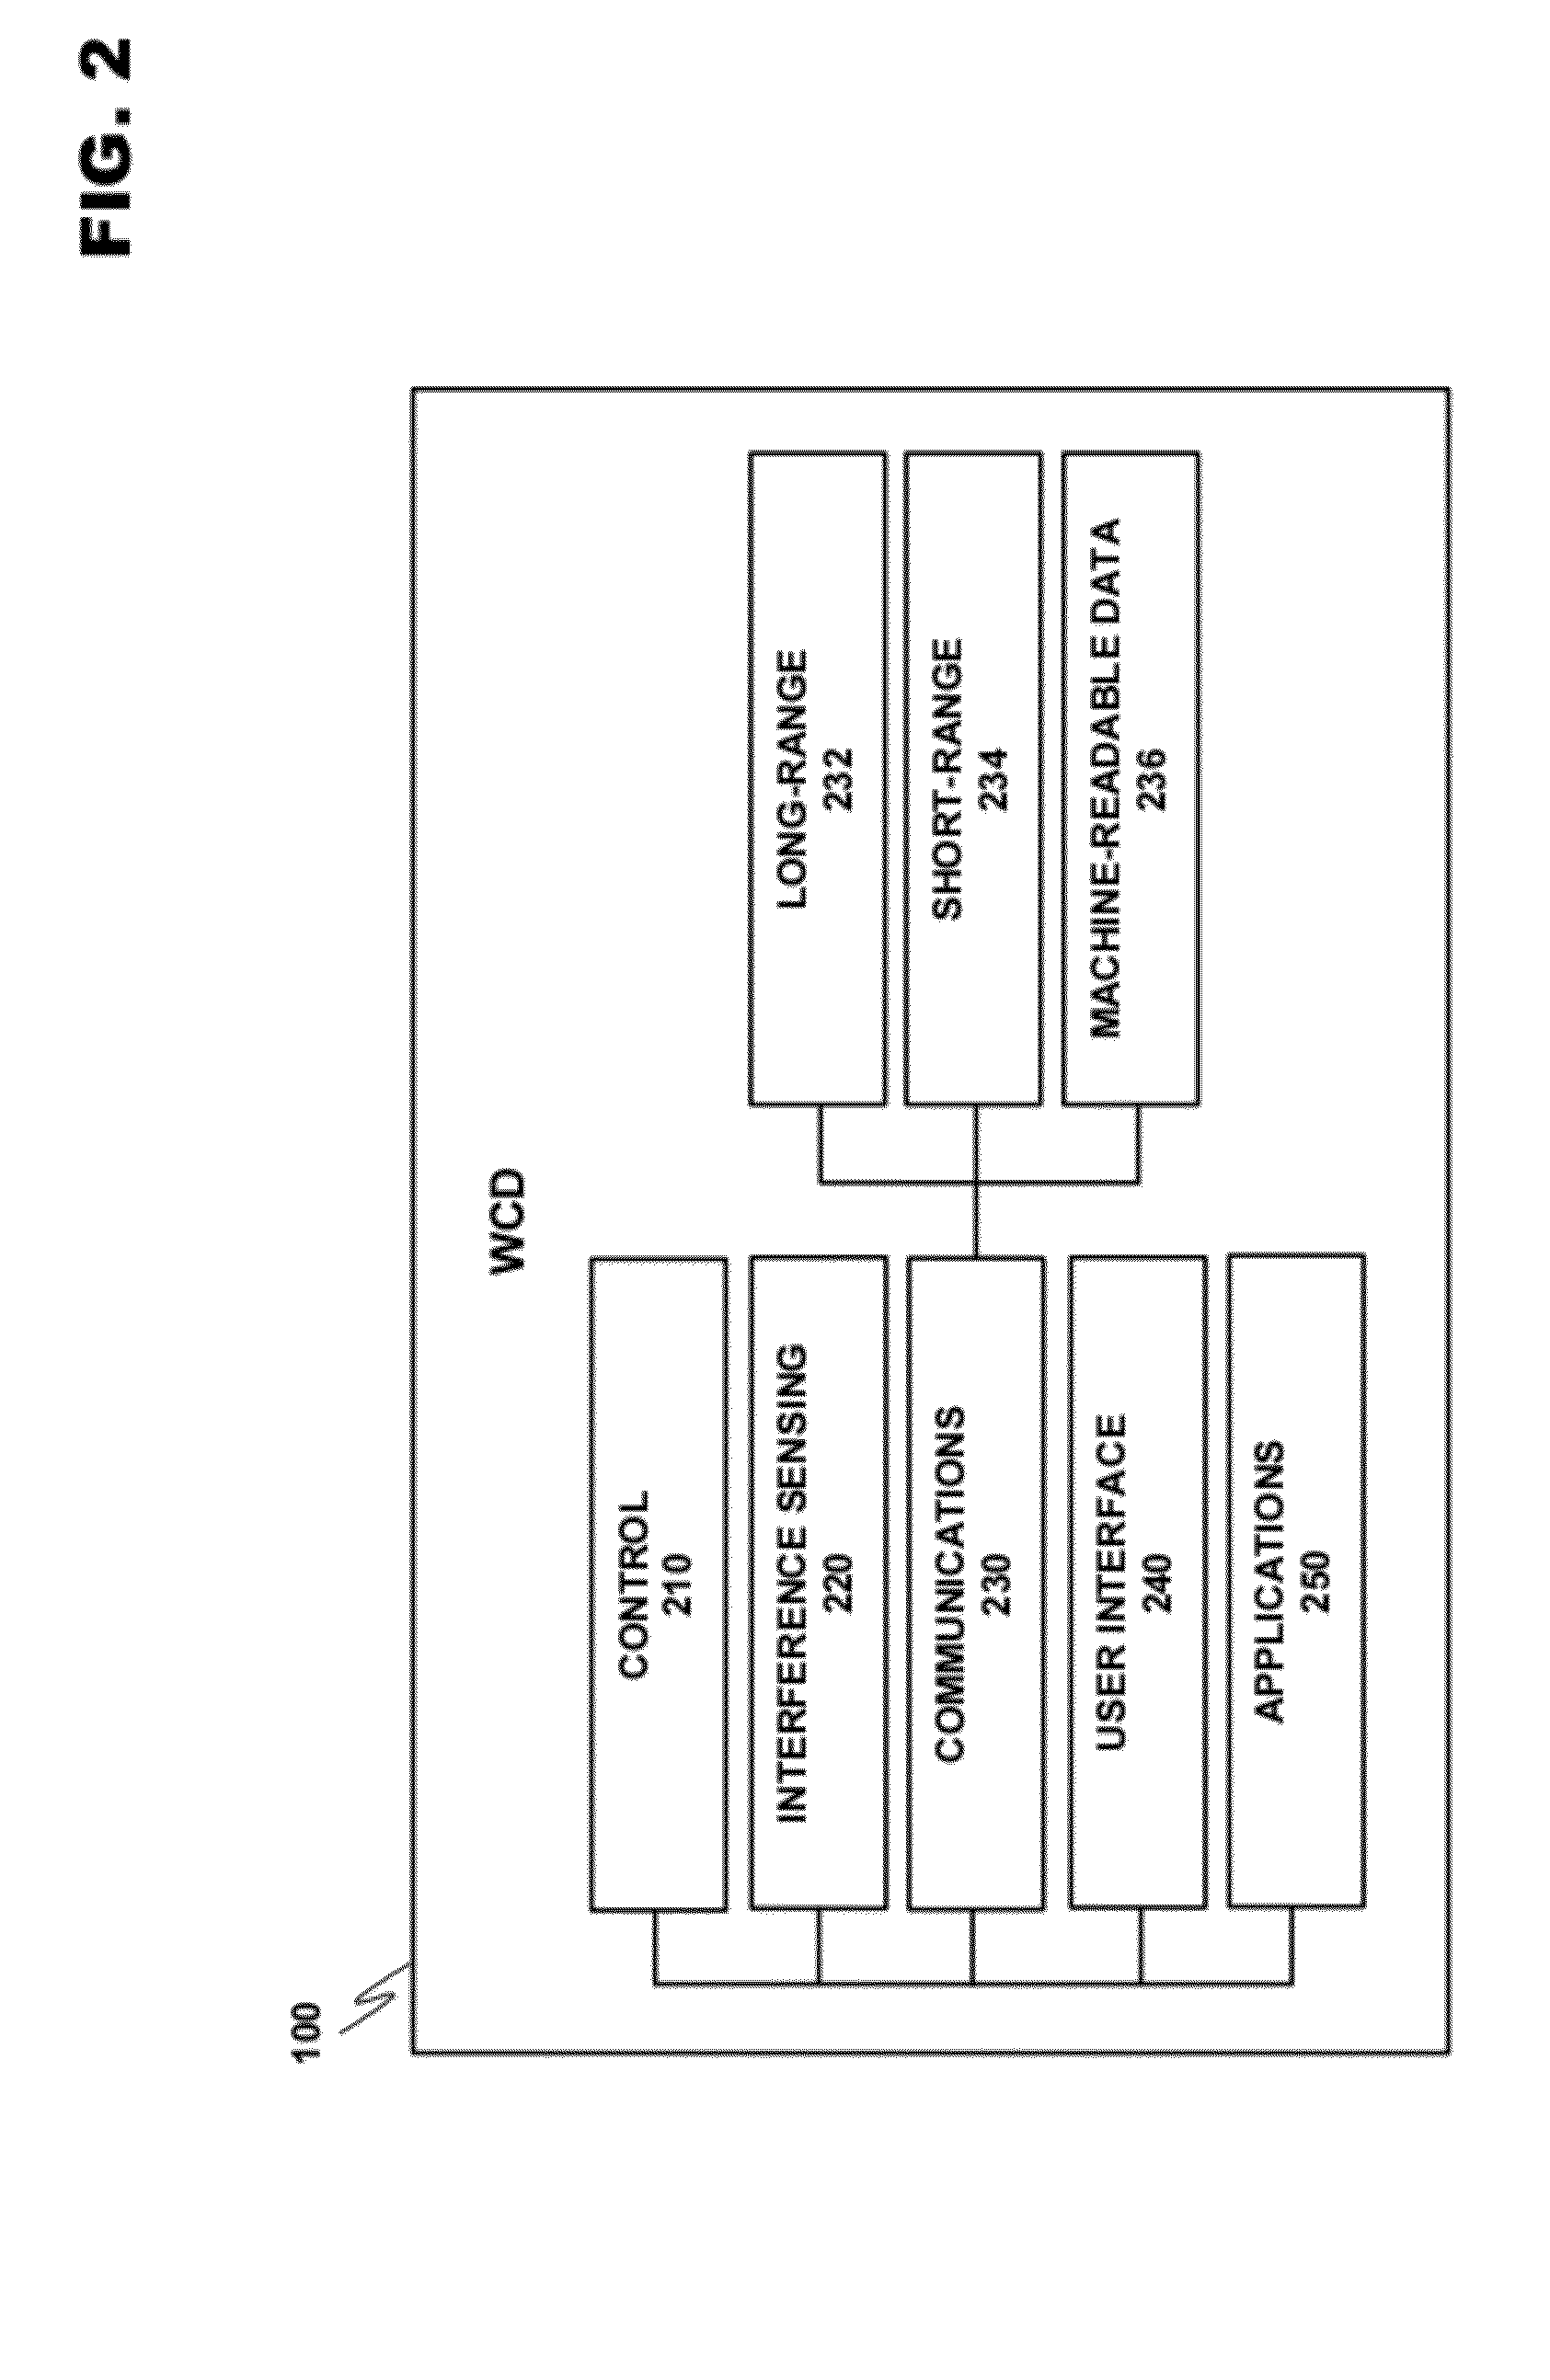 Service/mobility domain with handover for private short-range wireless networks